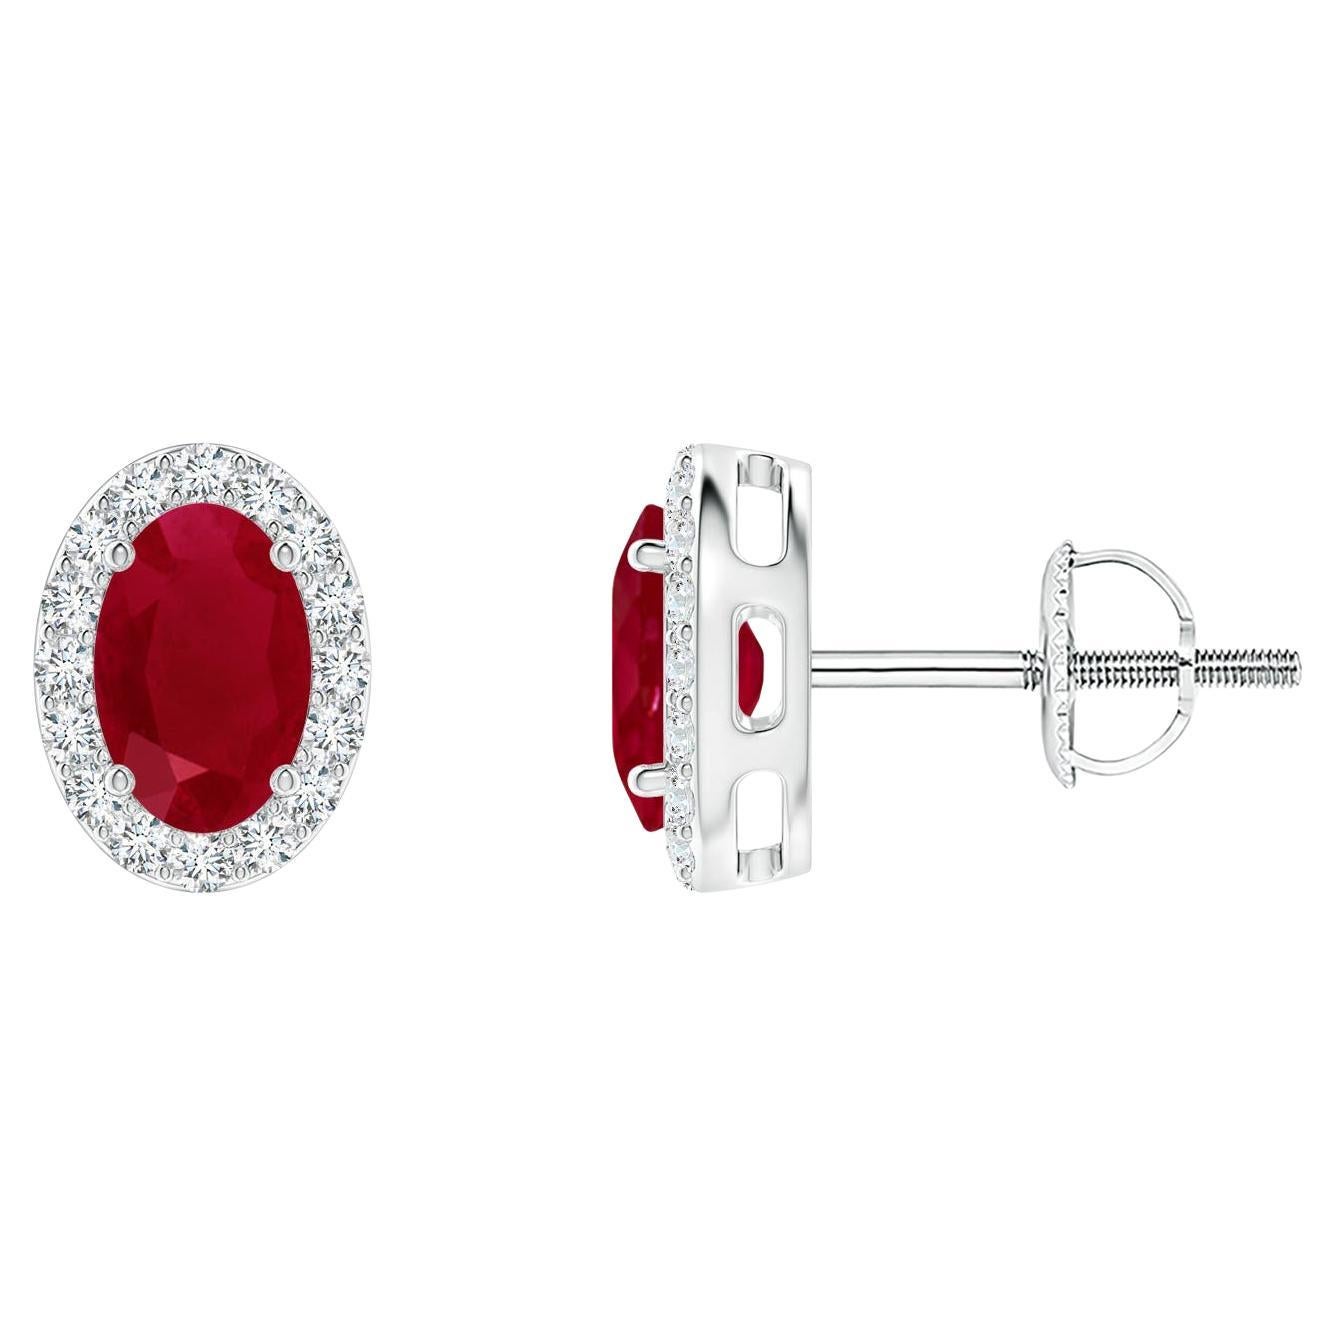 ANGARA Natural Oval 1.20ct Ruby Studs with Diamond Halo in Platinum